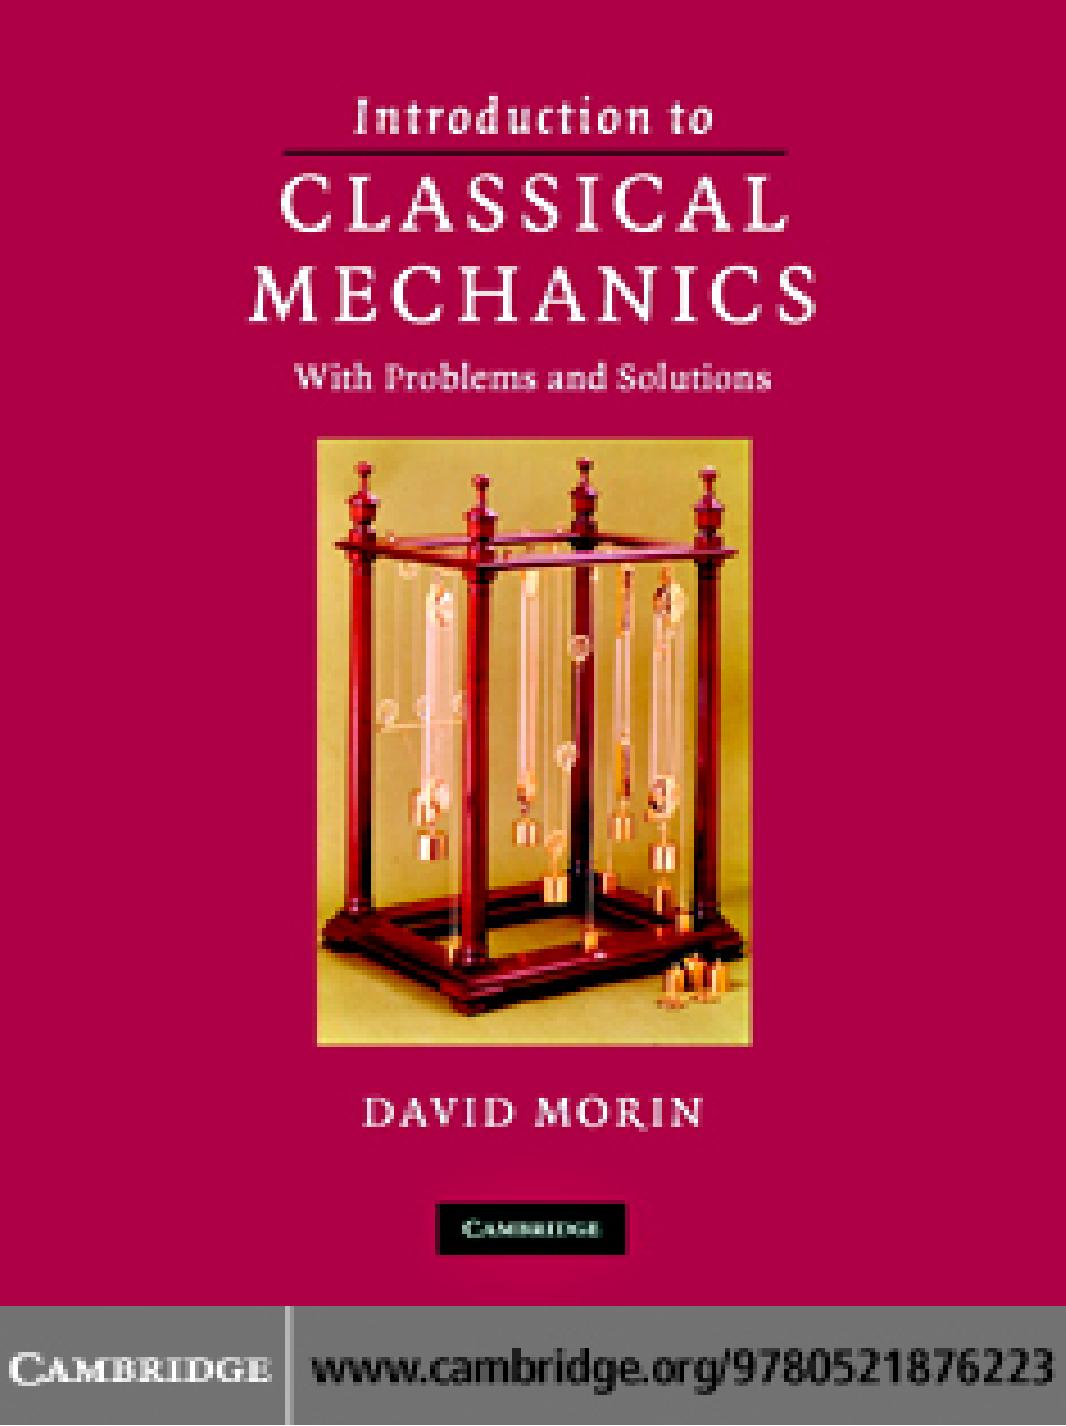 Introduction to Classical Mechanics with Problems and Solutions 2007 ( PDFDrive.com )